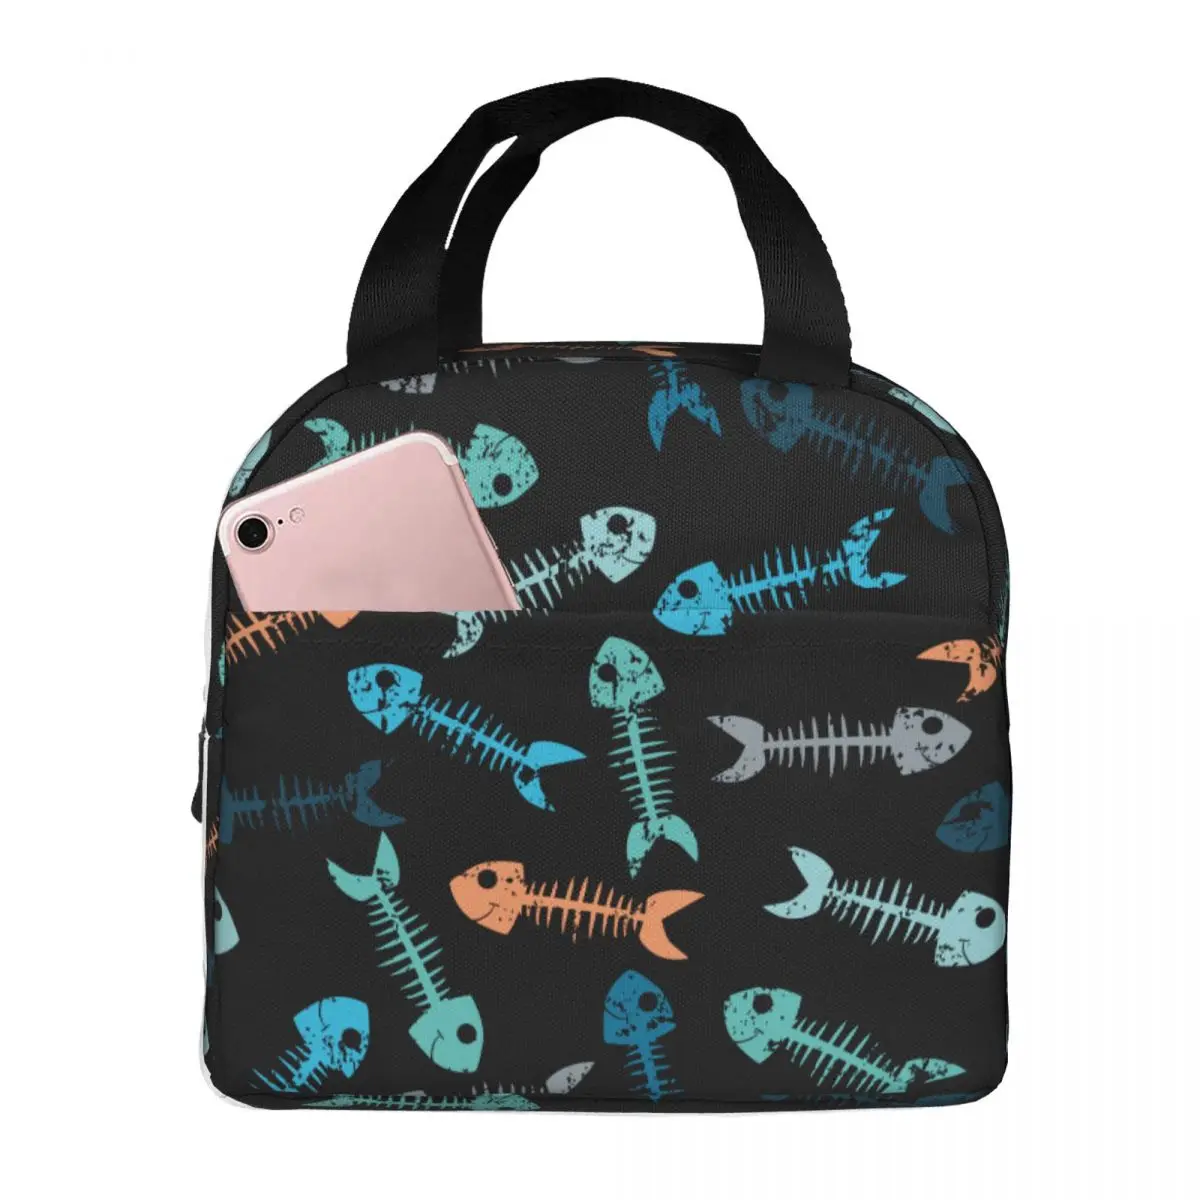 Lunch Bags for Men Women Fish Bones Thermal Cooler Portable Picnic Travel Oxford Tote Food Storage Bags